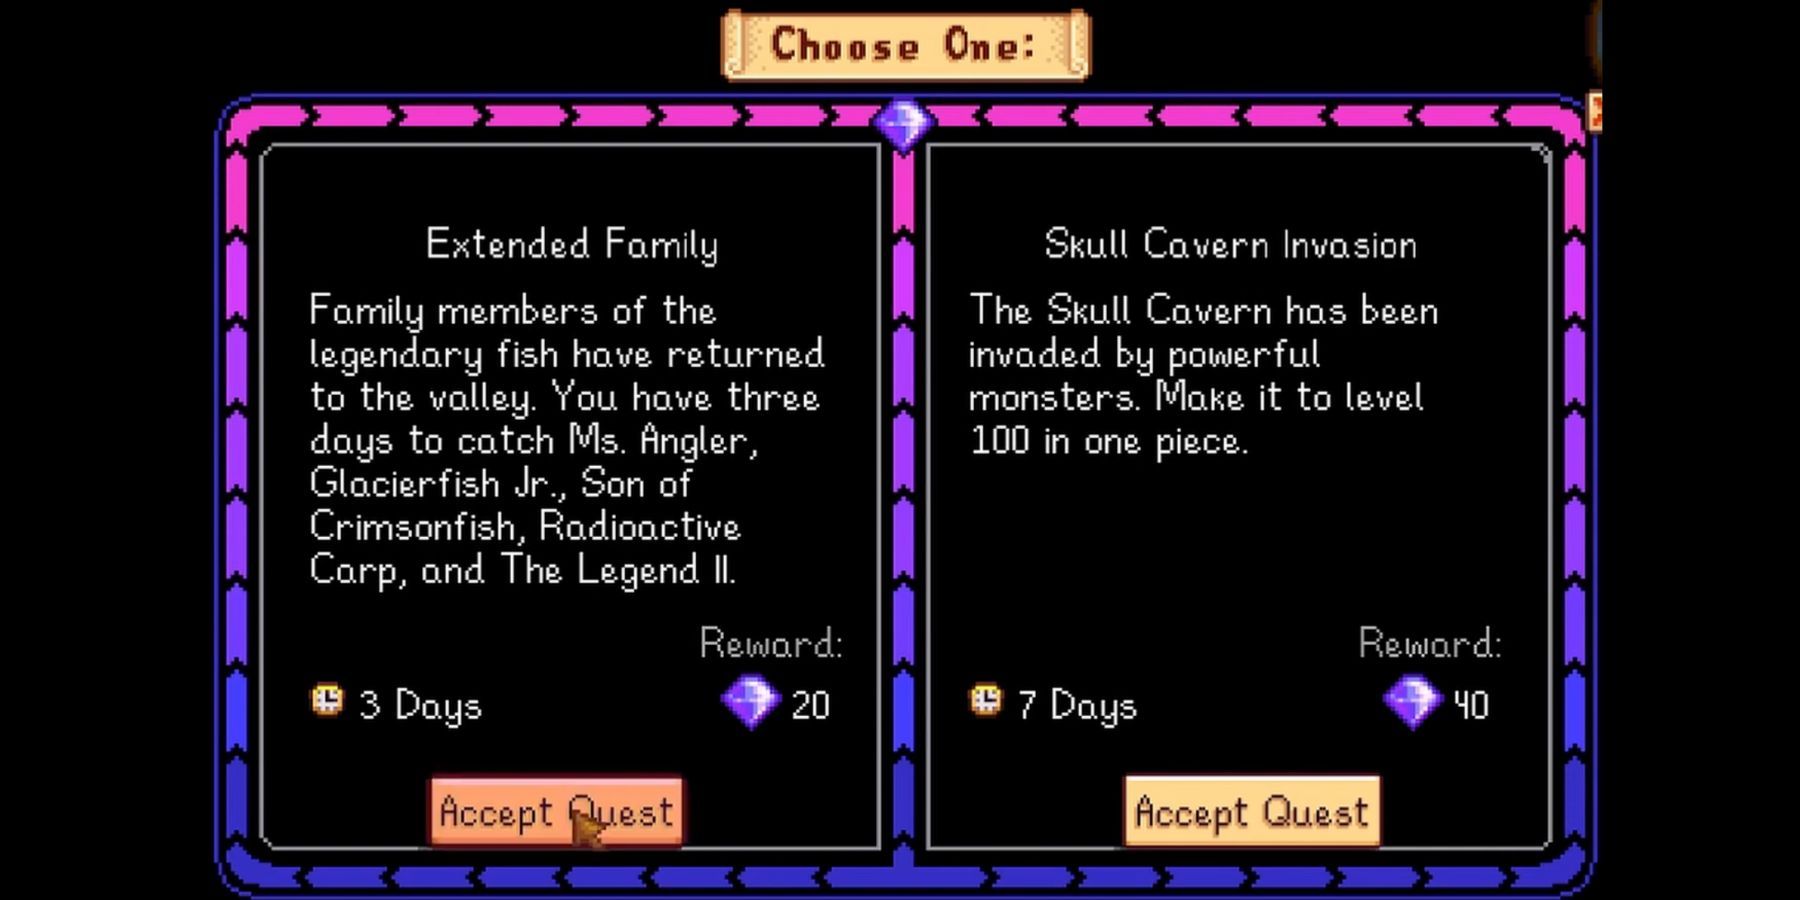 the extended family quest in stardew valley.